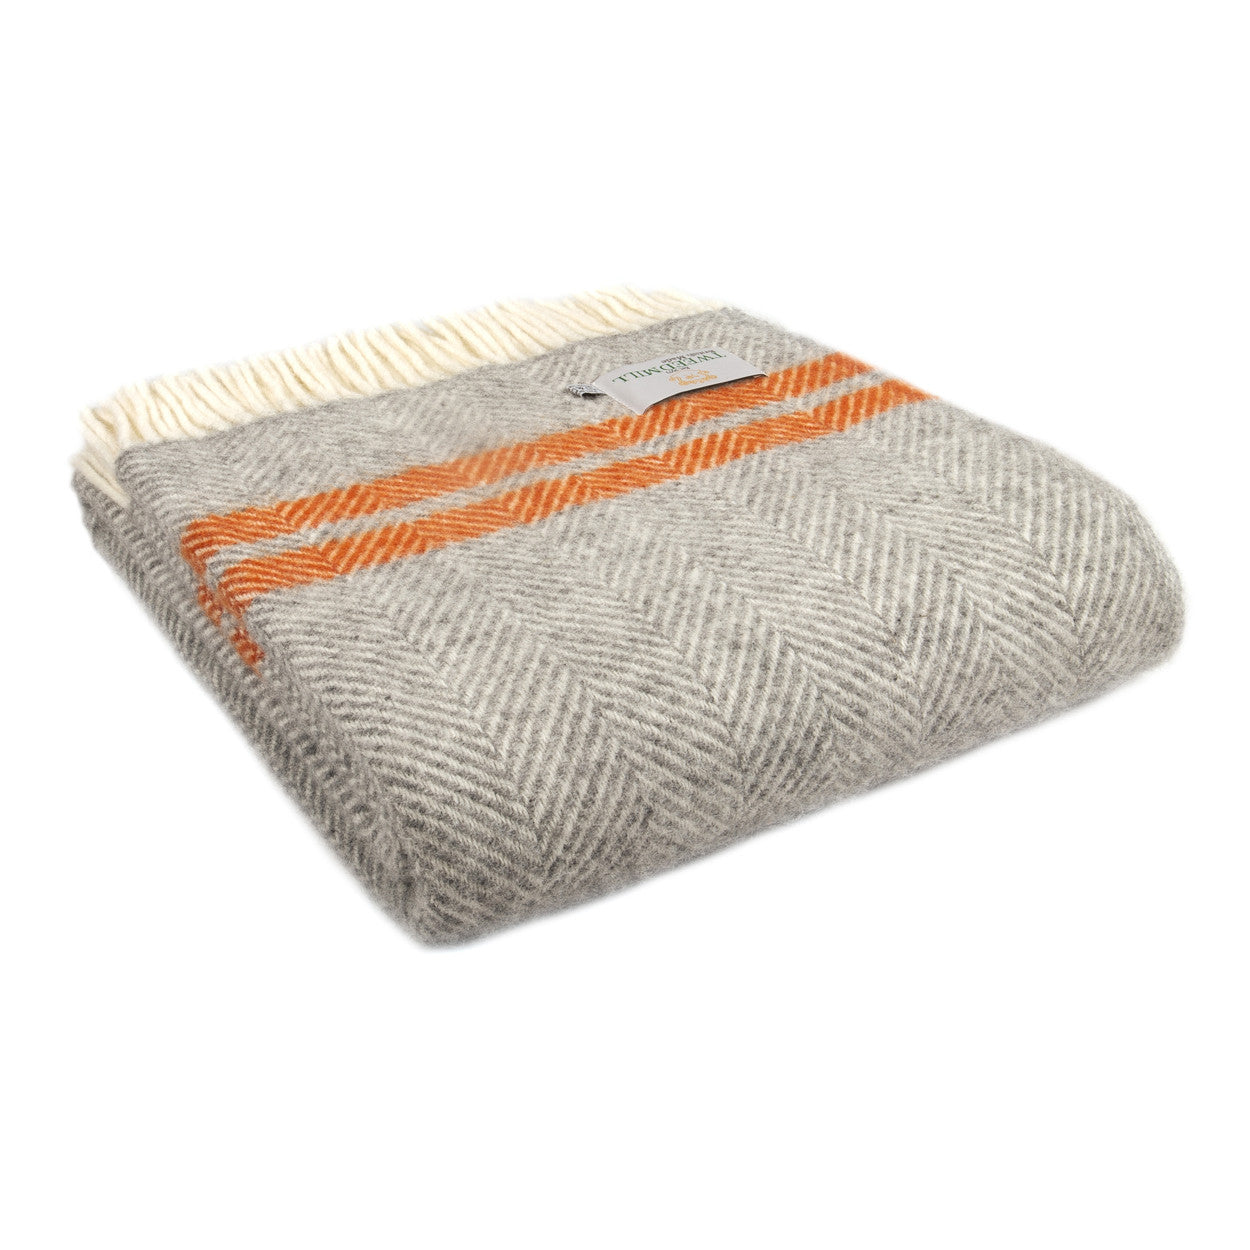 Fishbone 2 Stripe Large Throw - Pure New Wool Made in the UK by Tweedmill